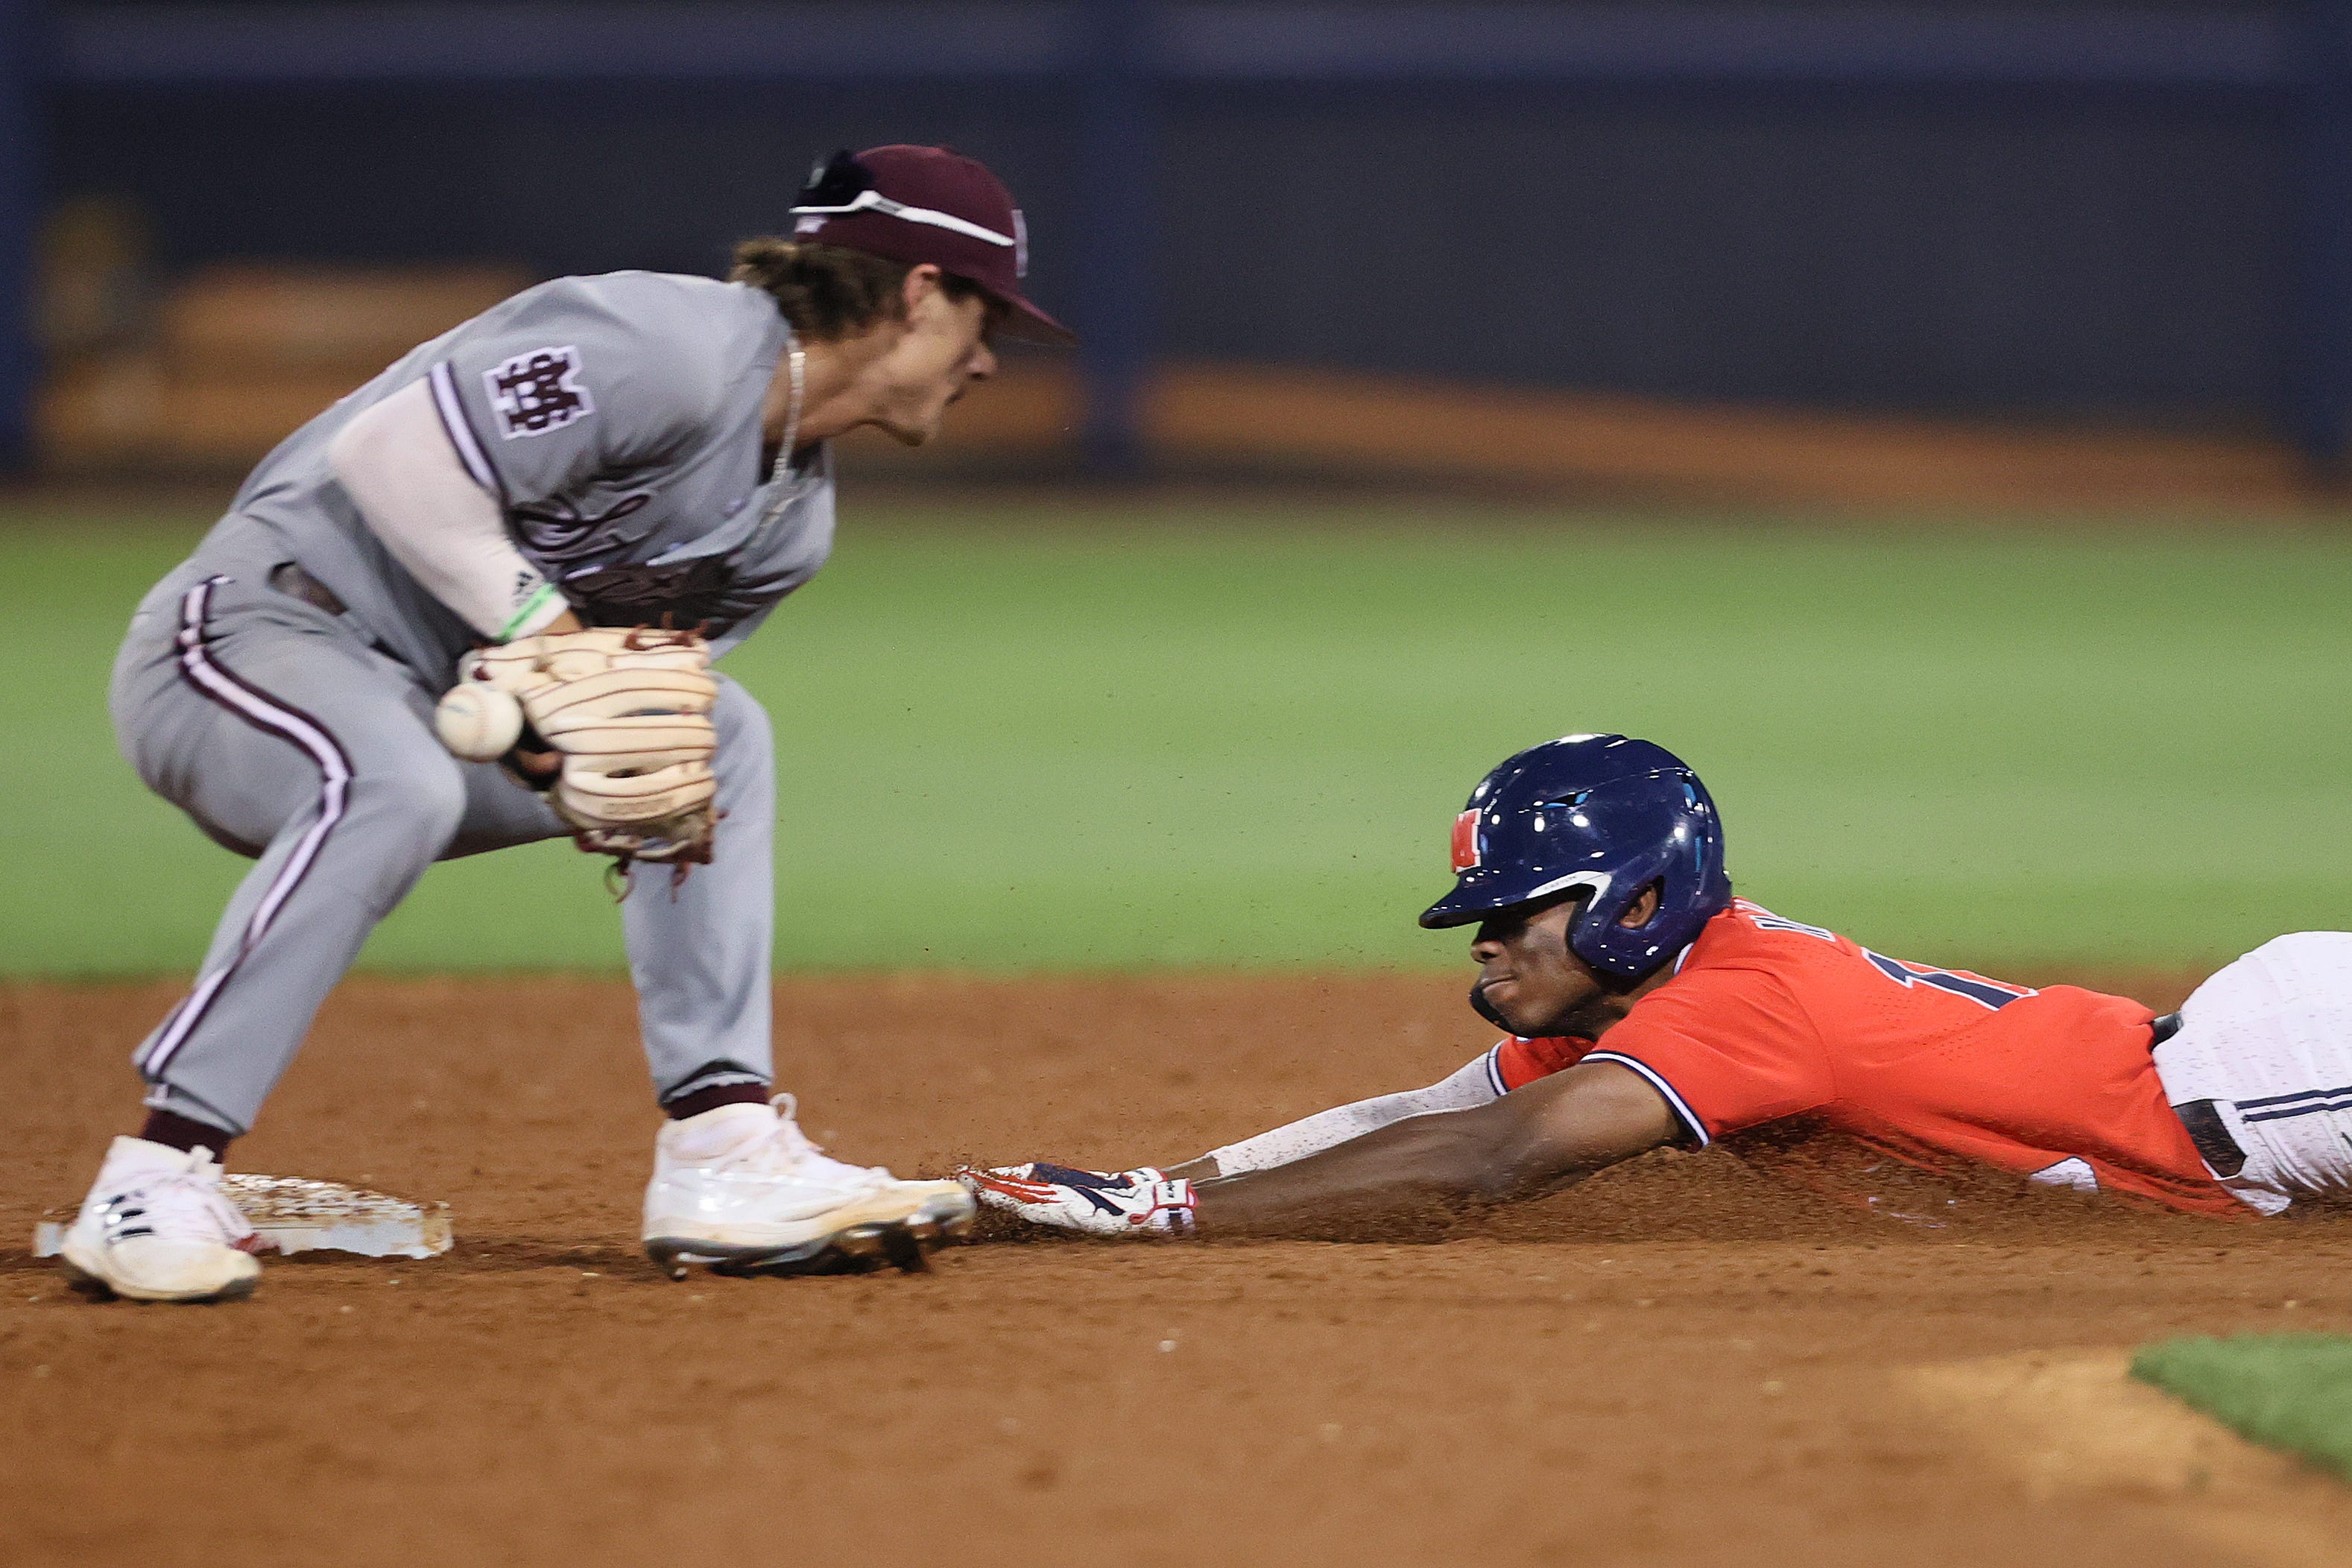 Live Baseball Updates: Mississippi State vs. Ole Miss, Governor’s Cup